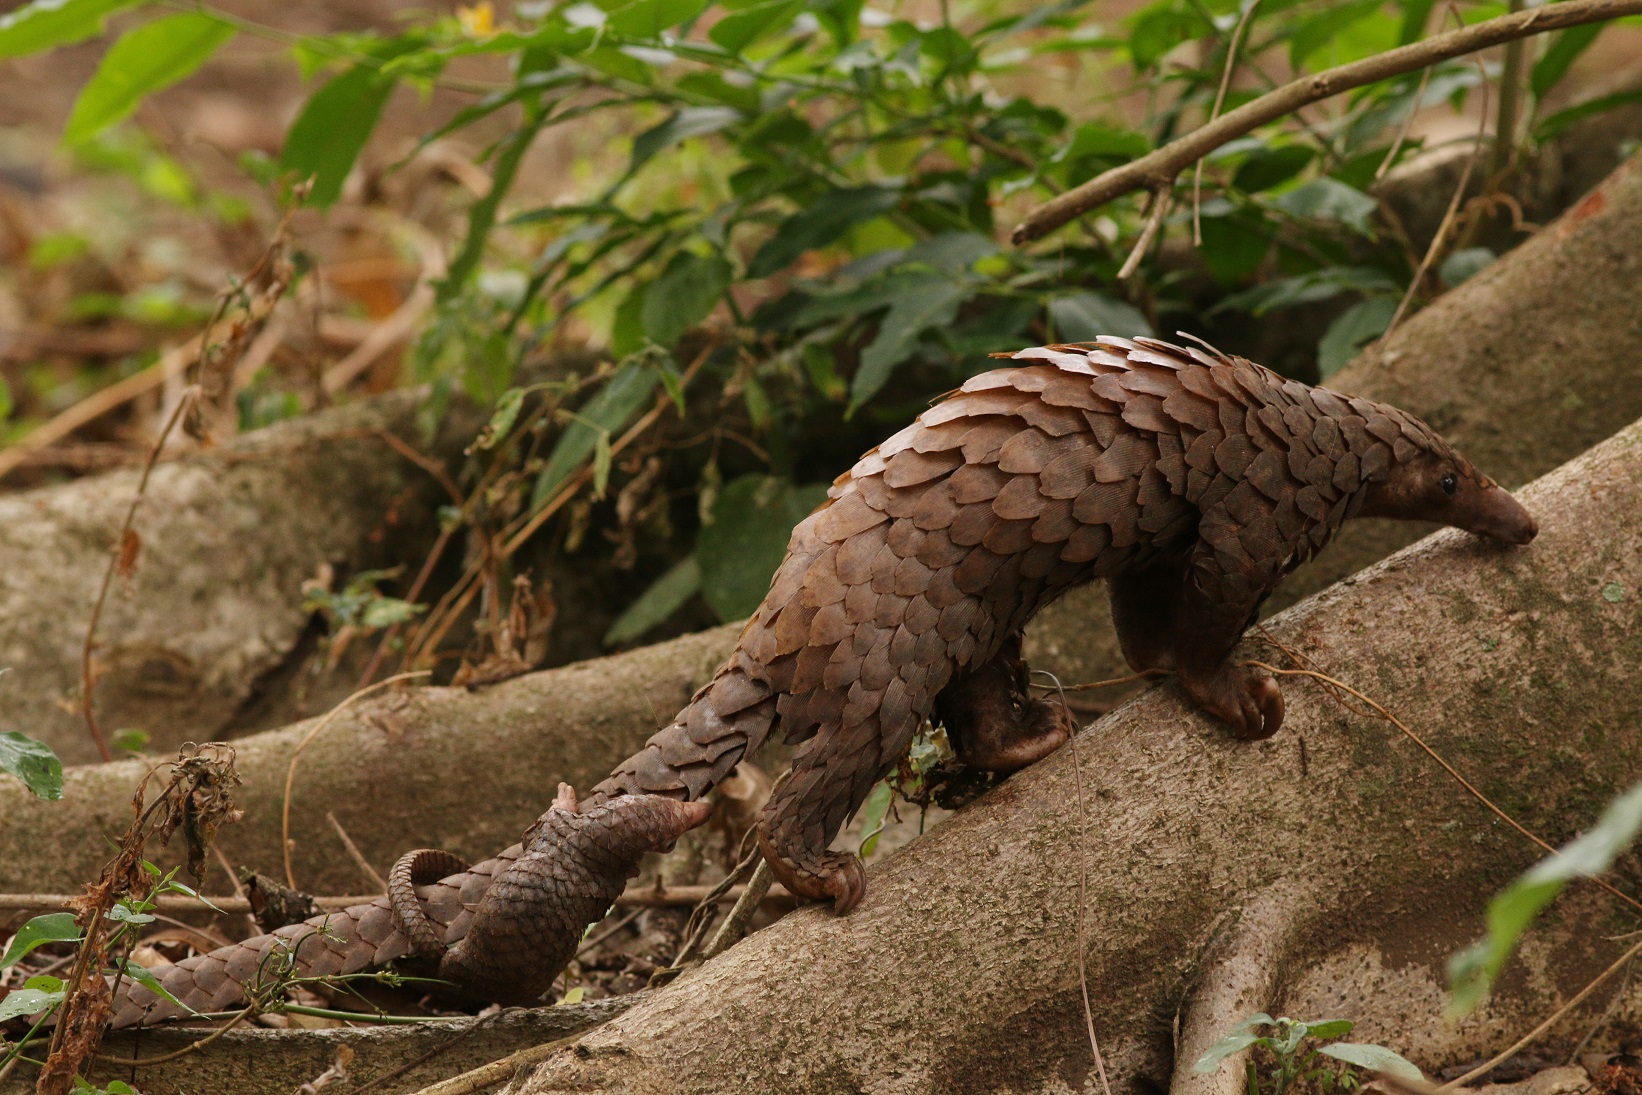 pangolin baby ride on its moter's tail